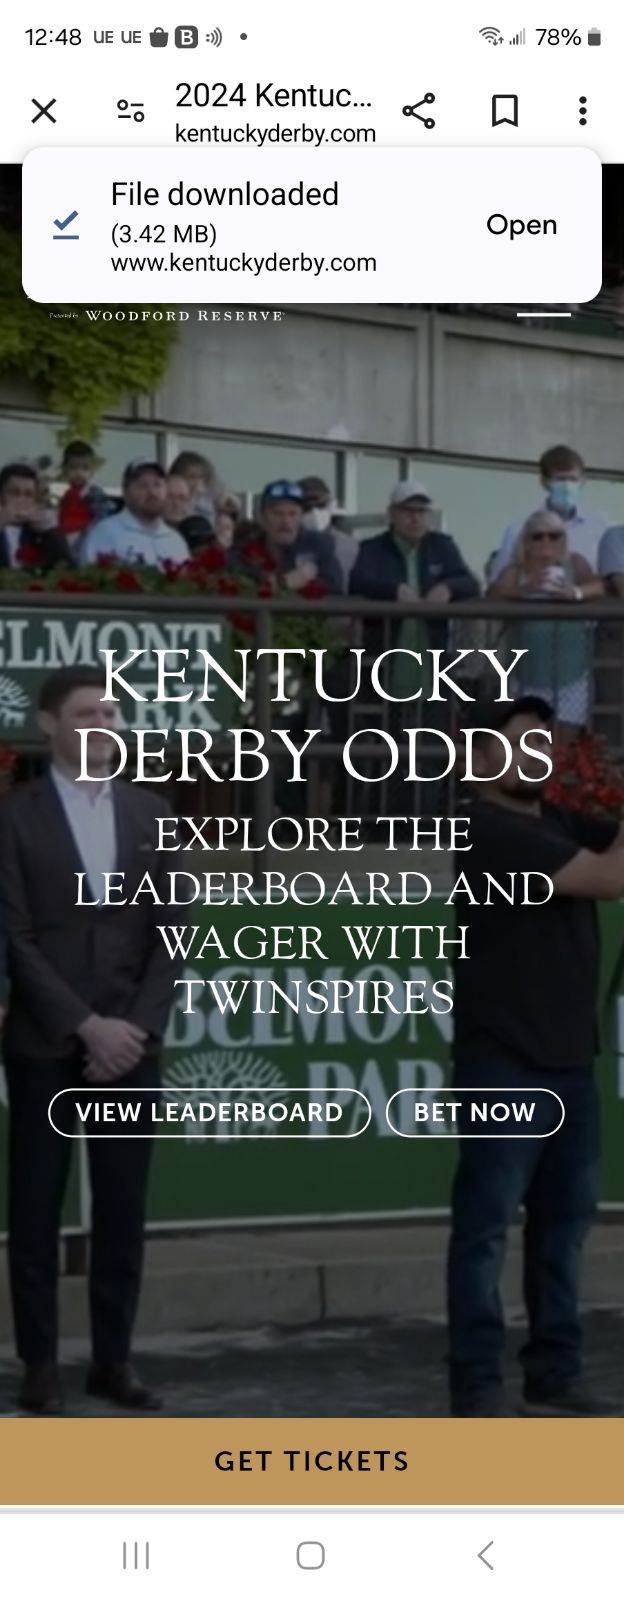 Kentucky Derby 2 Day Passes